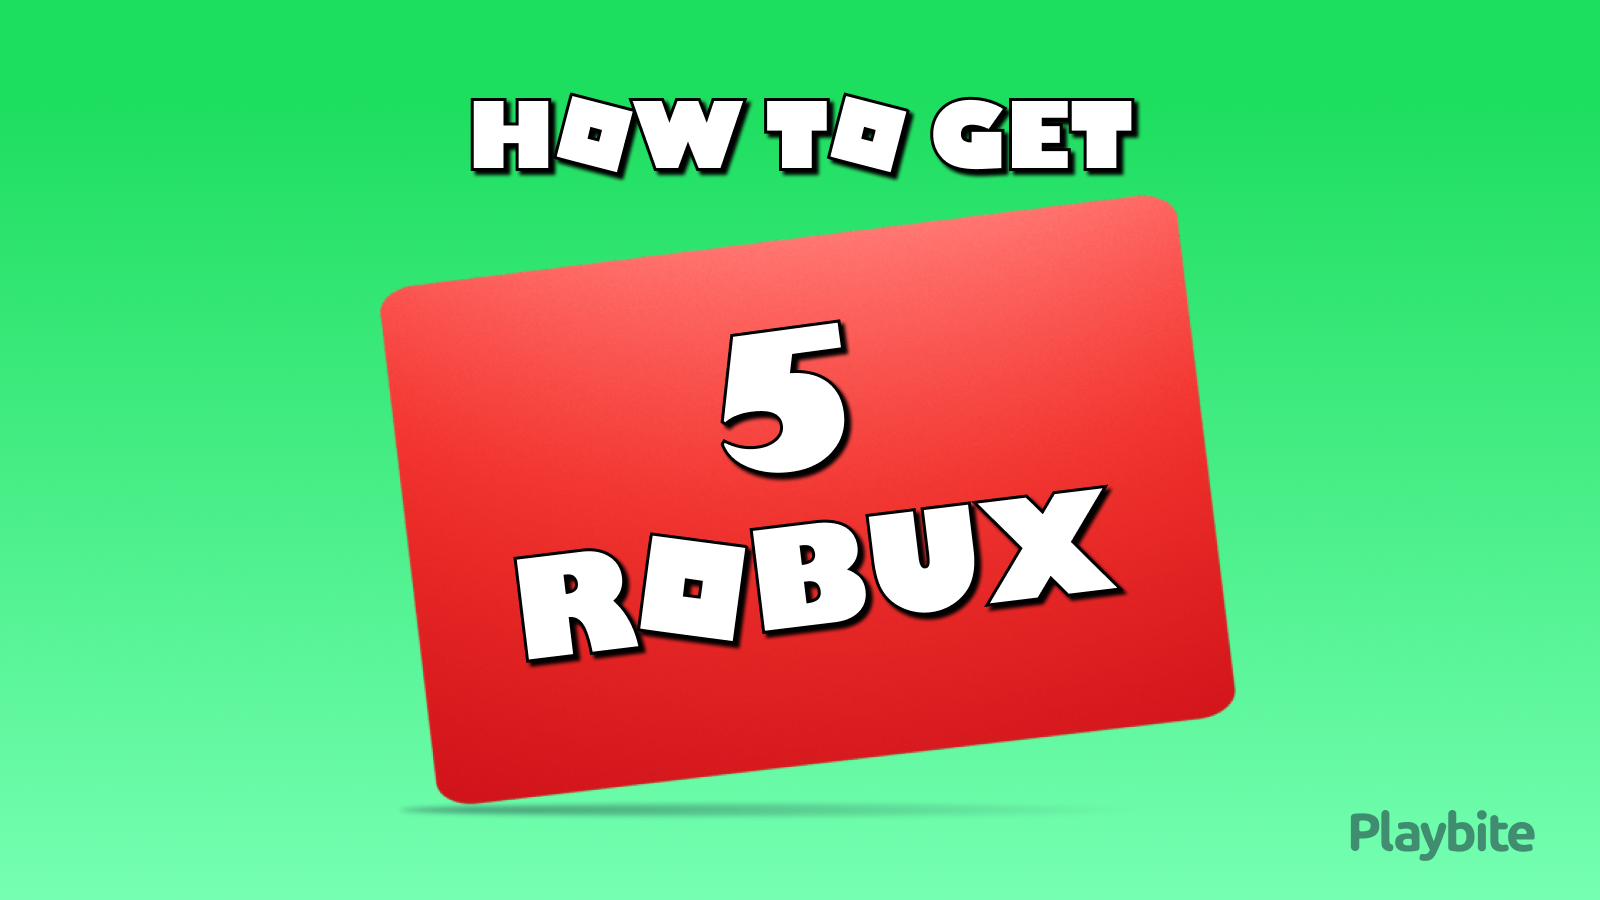 How To Get 5 Robux For Free - Playbite